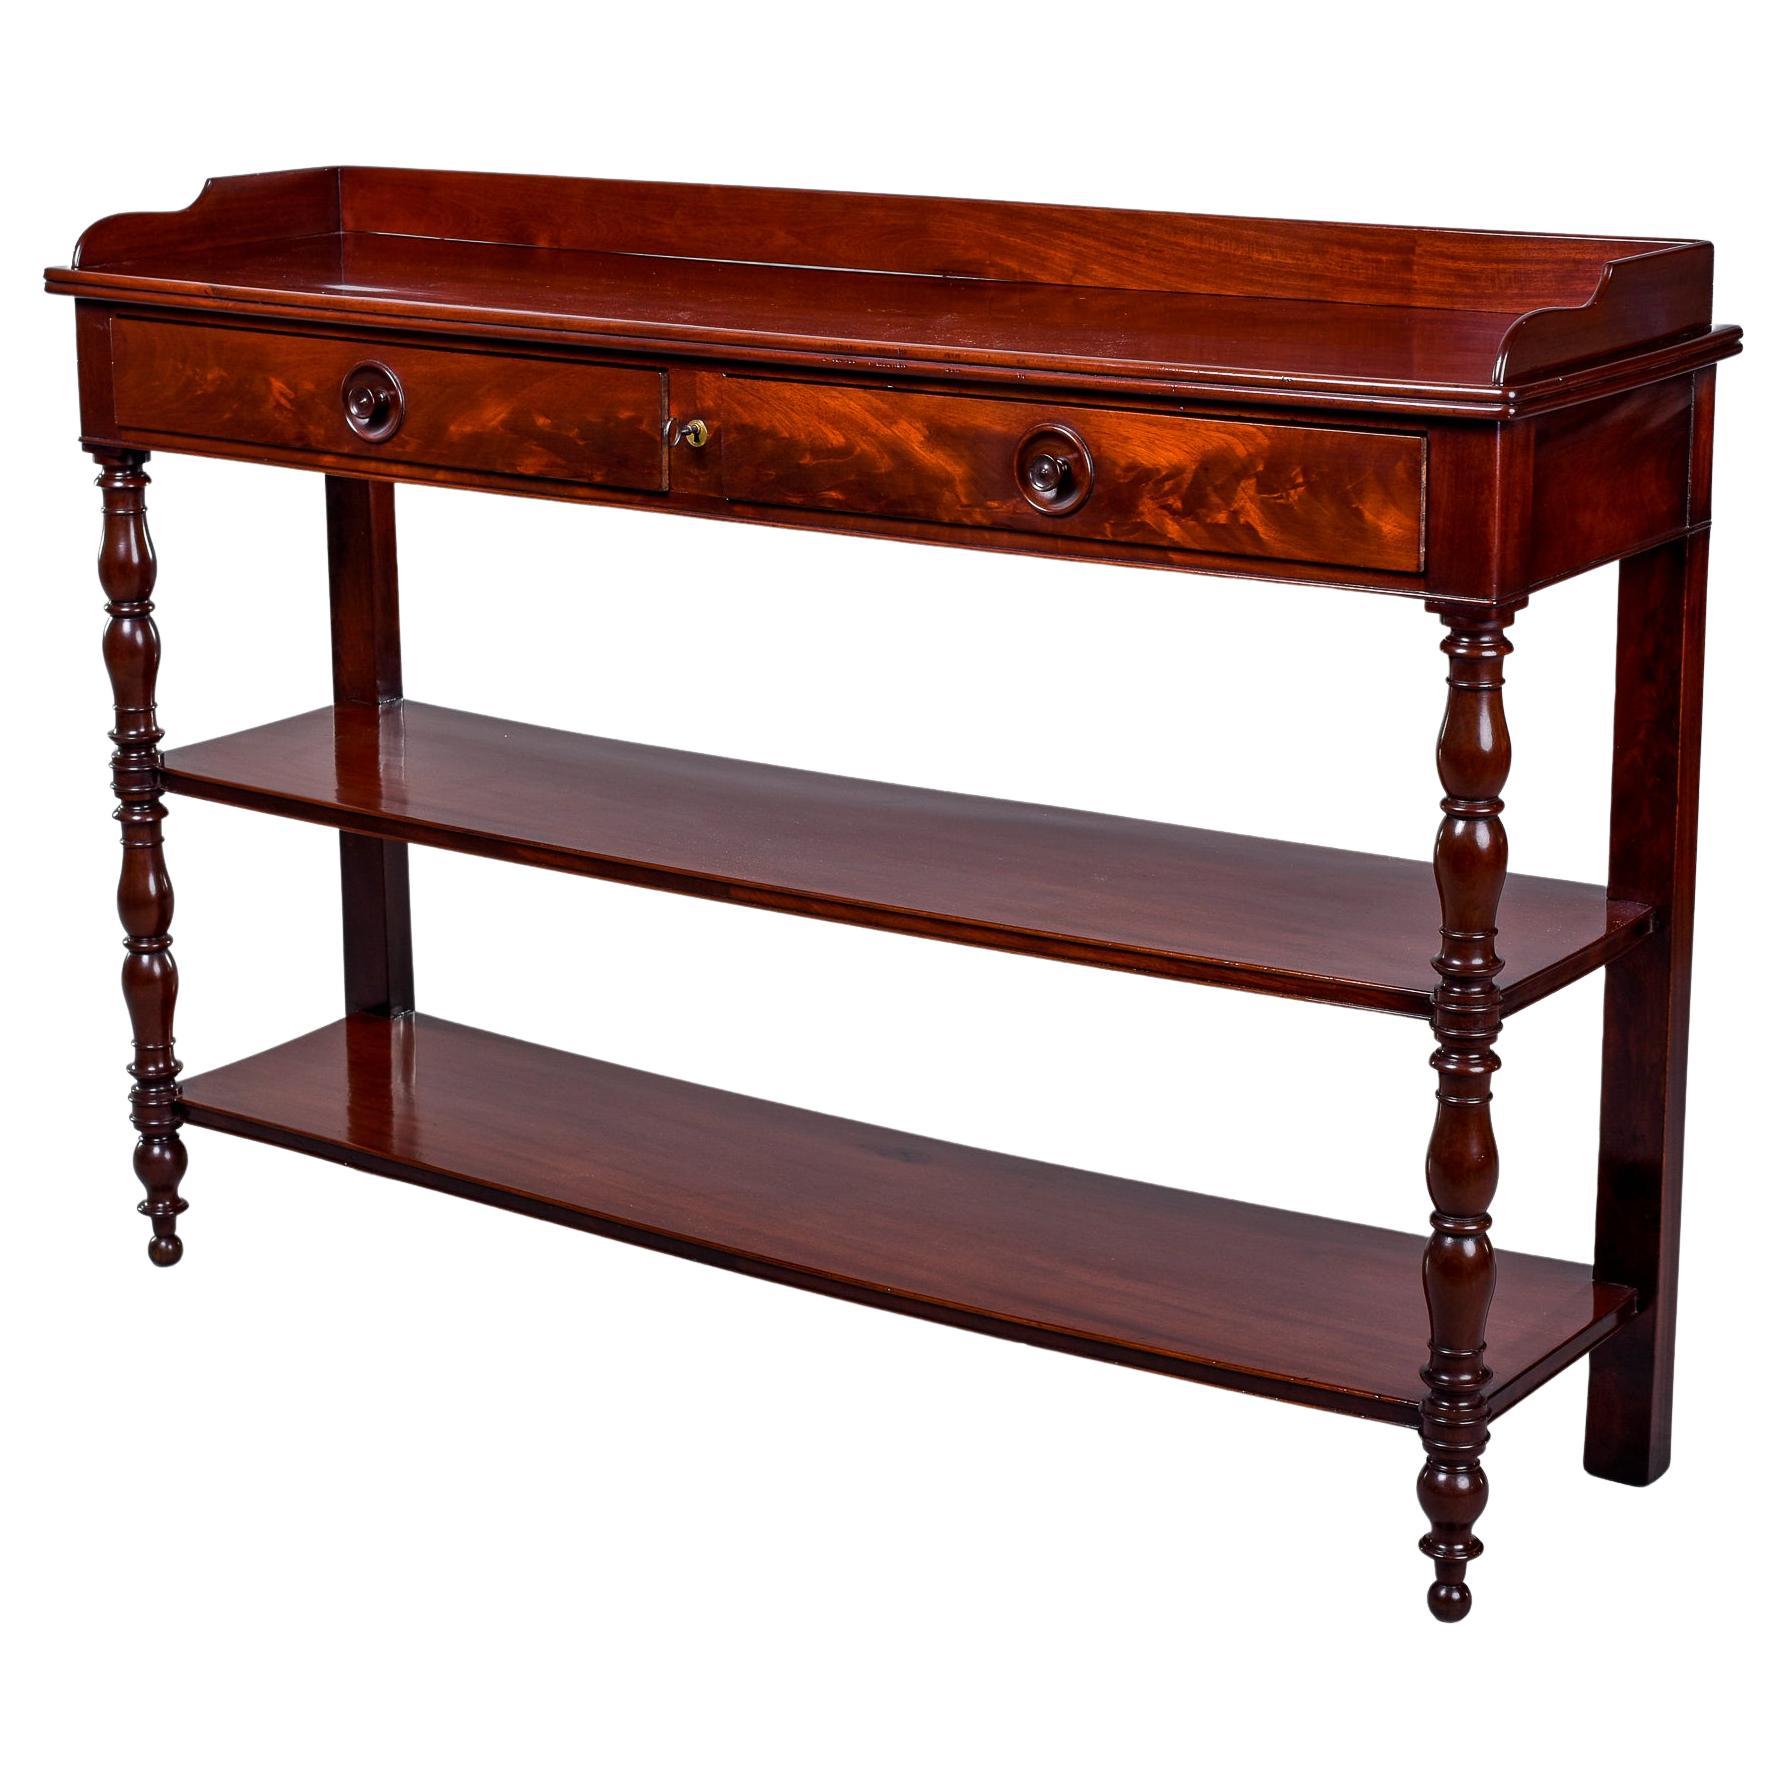 Early 20th C English Mahogany Three Tier Server with Drawers    For Sale